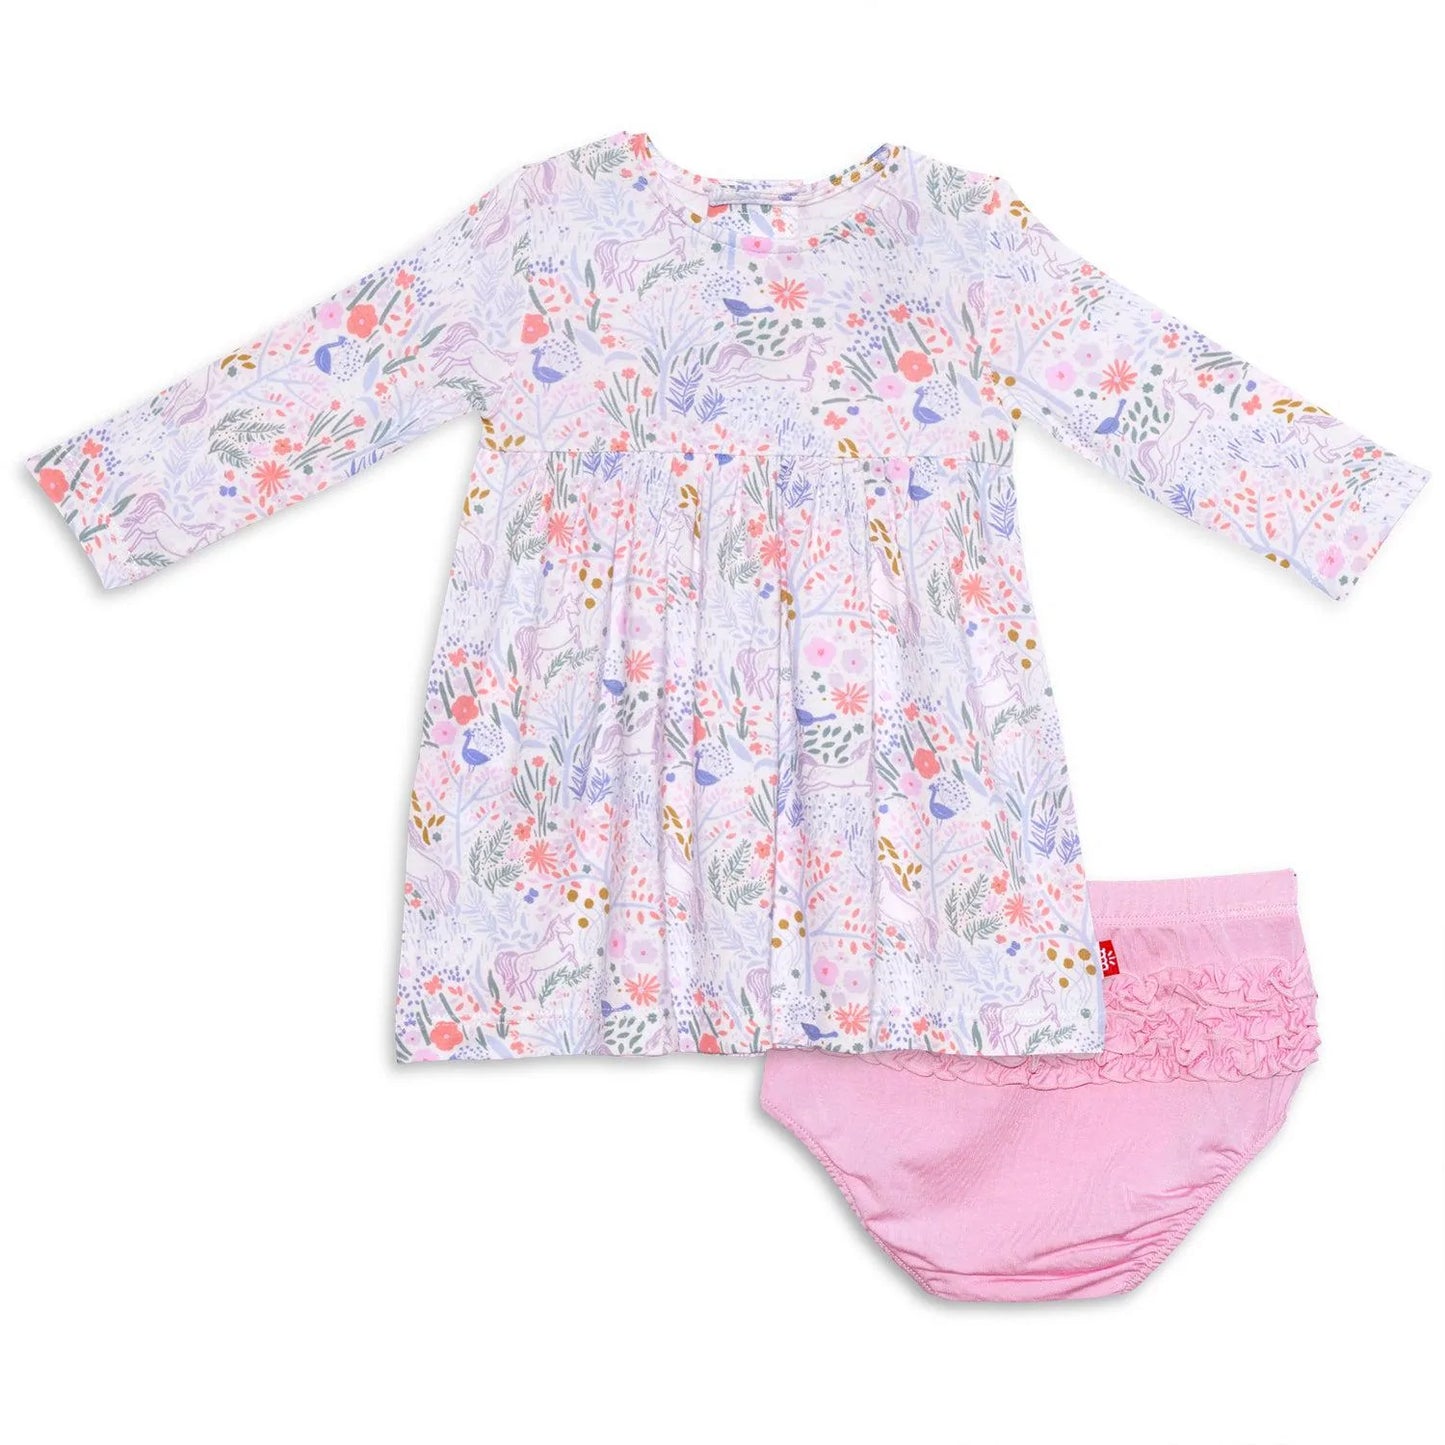 Pixie Pines Modal Magnetic Dress and Diaper Cover  - Doodlebug's Children's Boutique